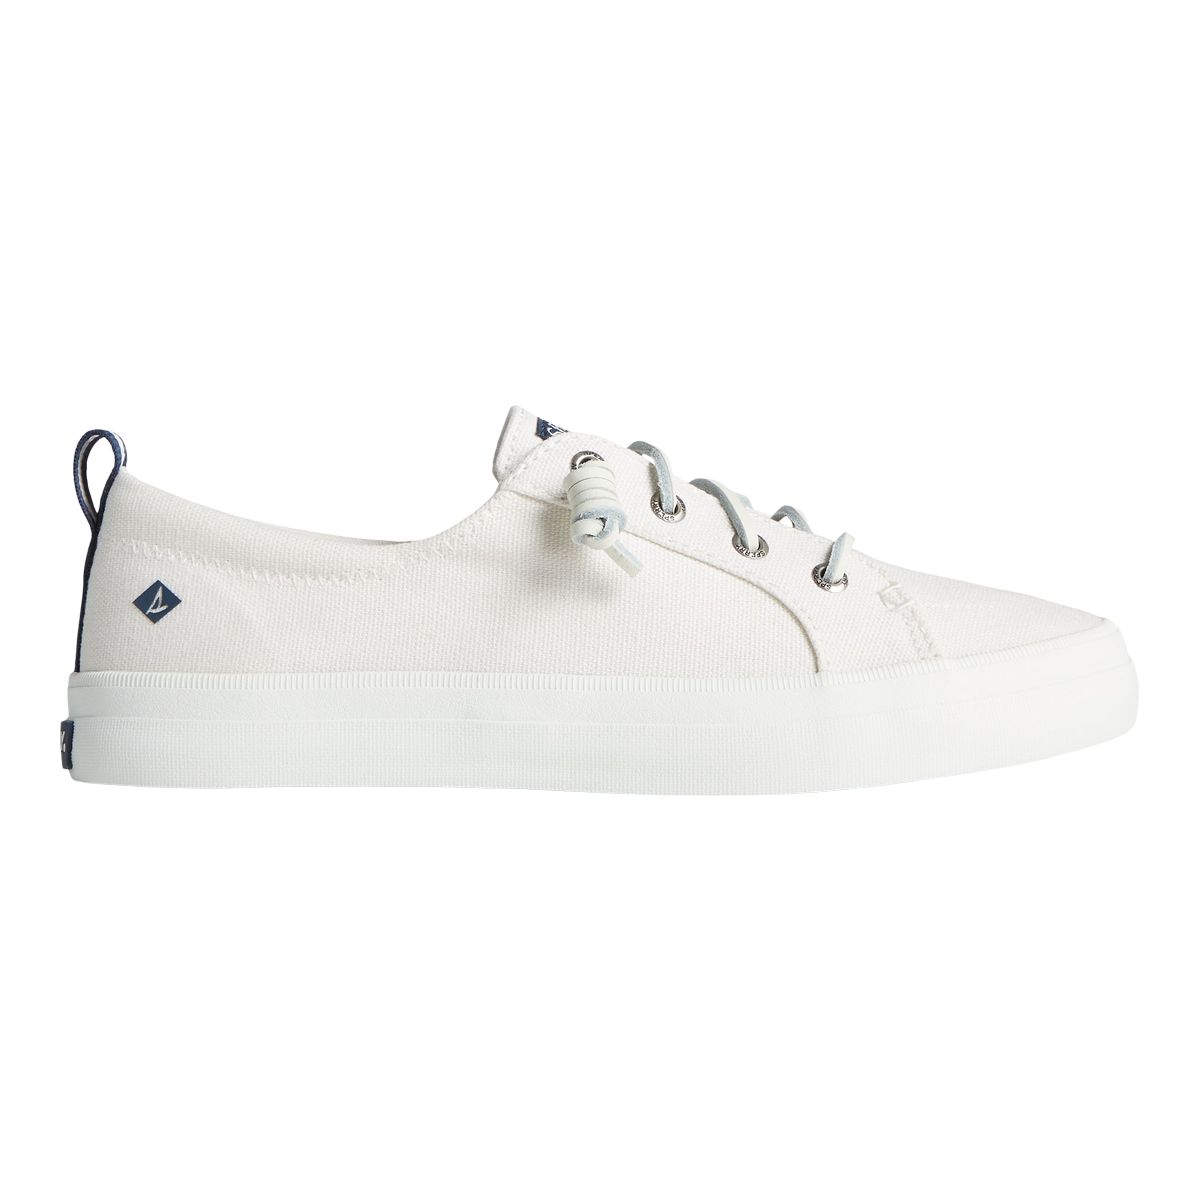 Image of Sperry Women's Crest Vibe Shoes Sneakers